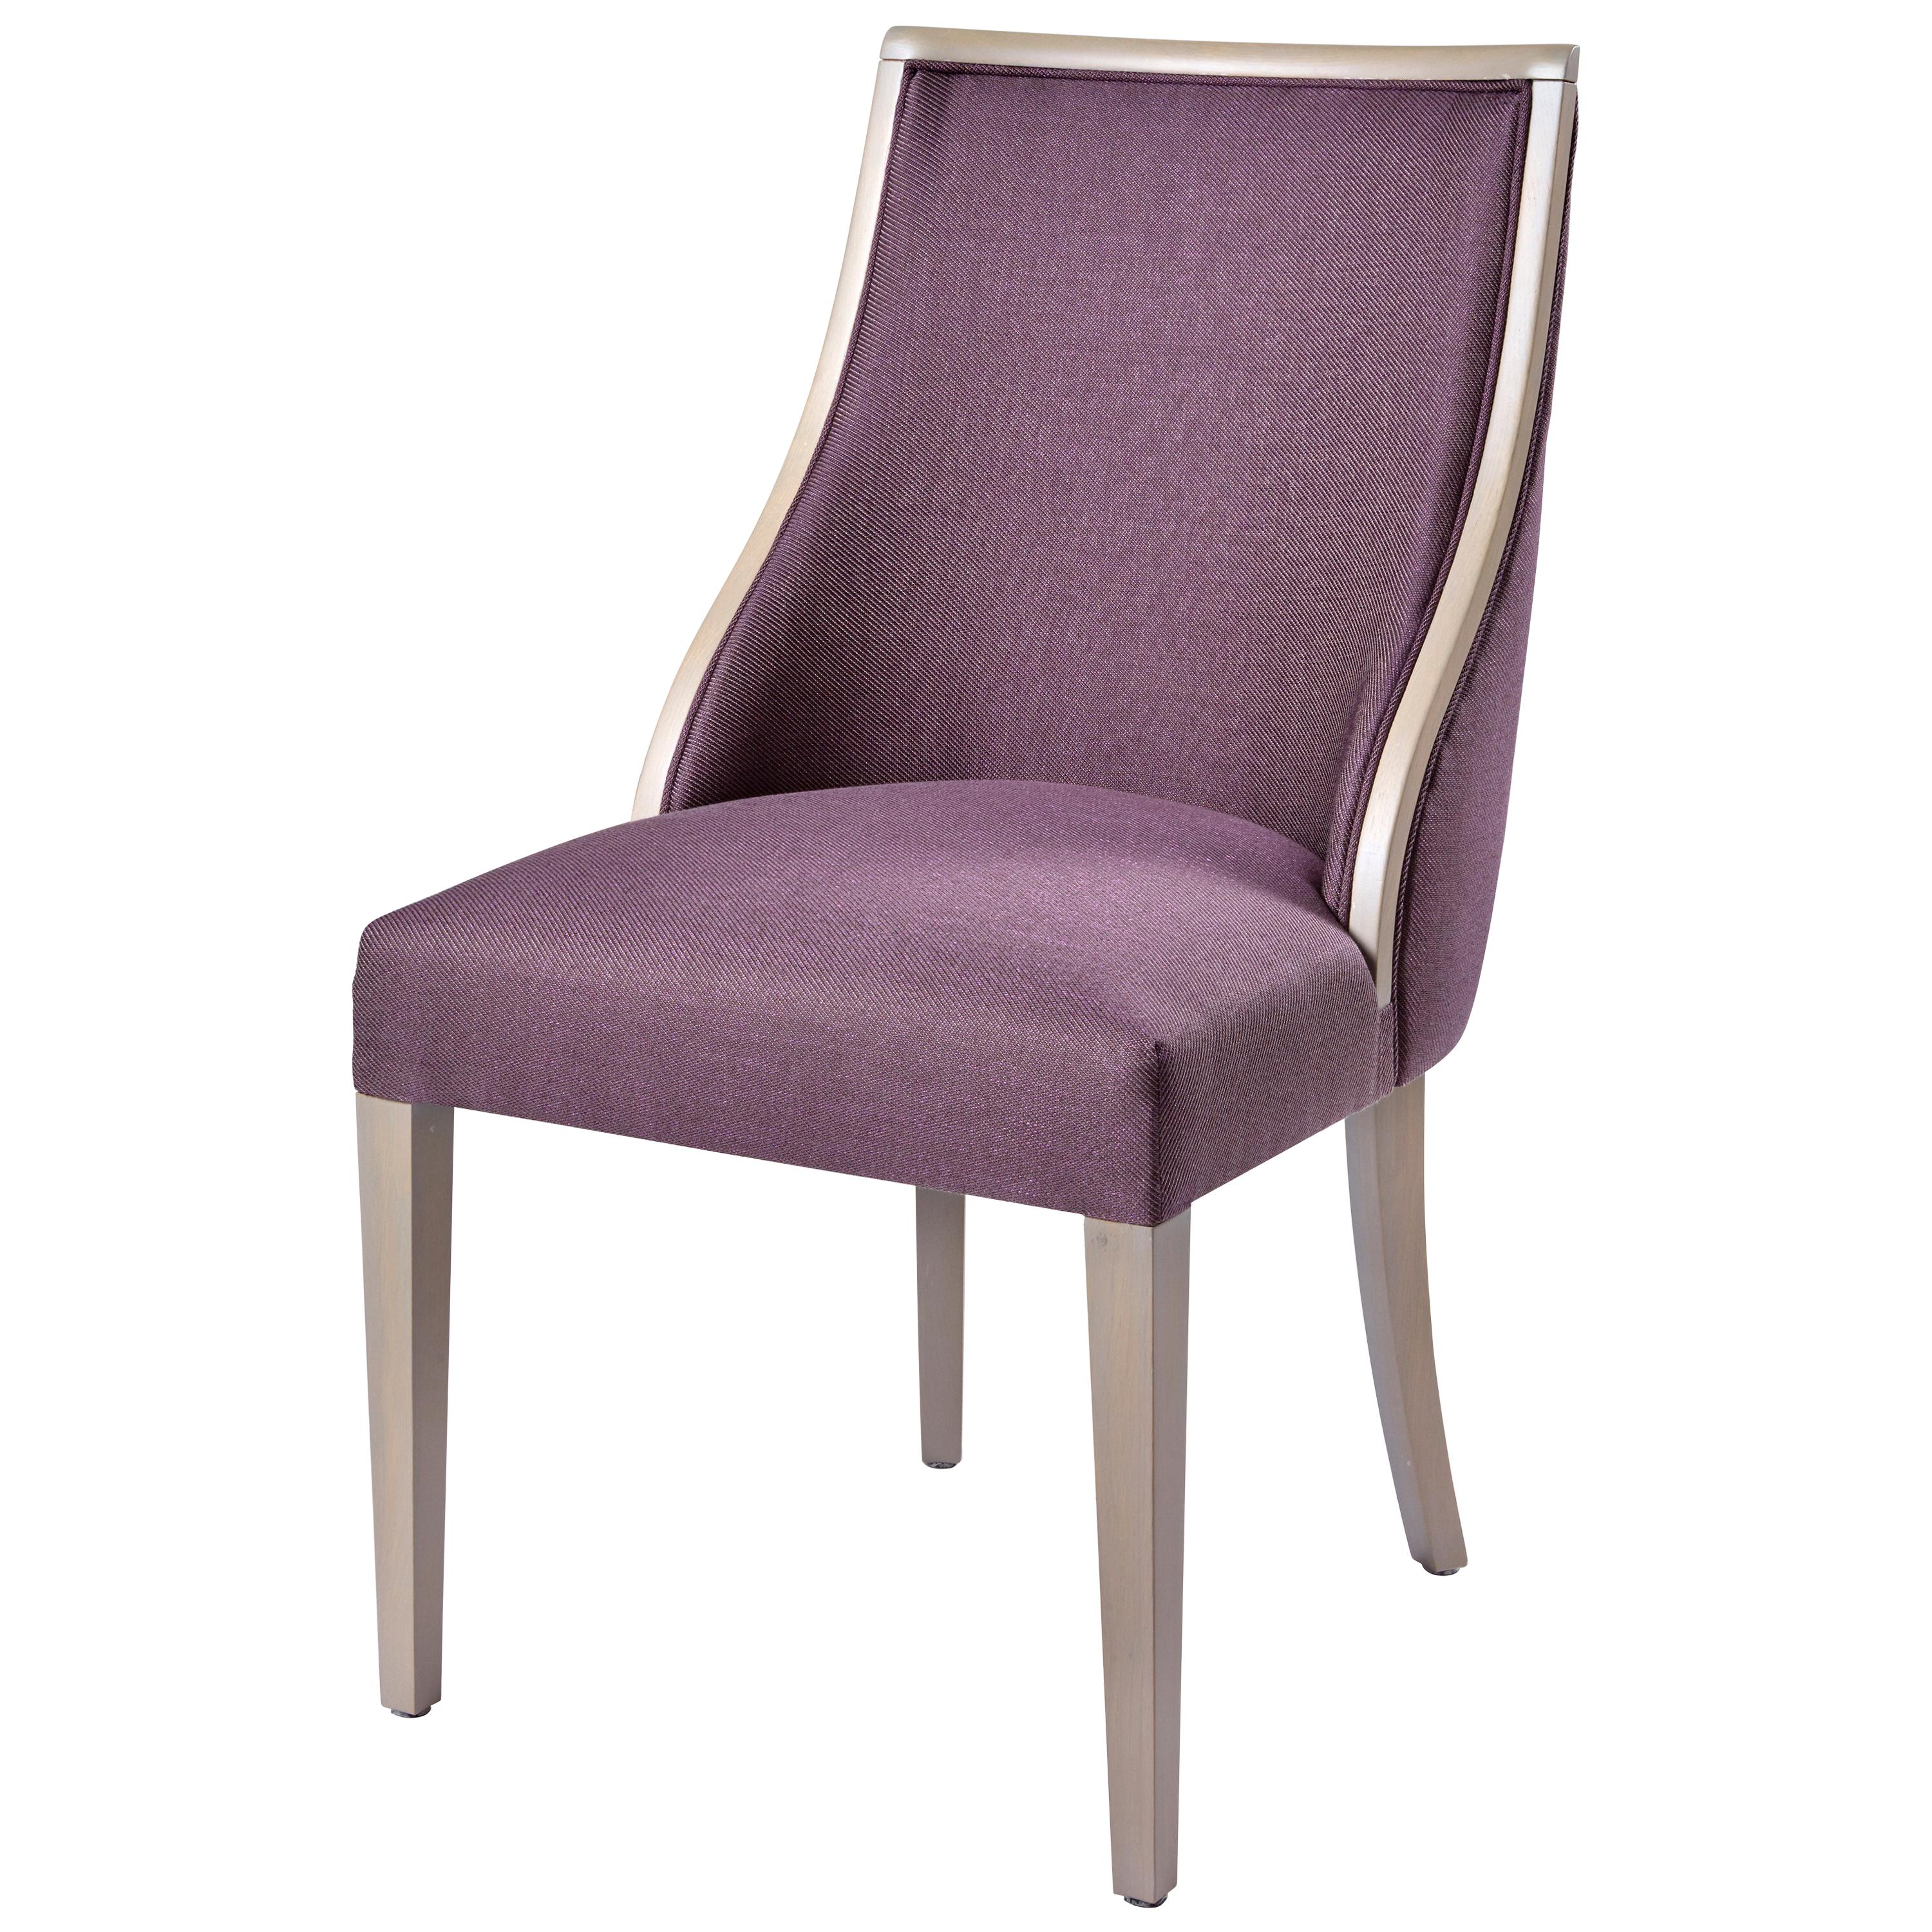 Canoe Chair, Sultry Side Silhouette, Flared Back Leg and Sink-in Seat Chair For Sale